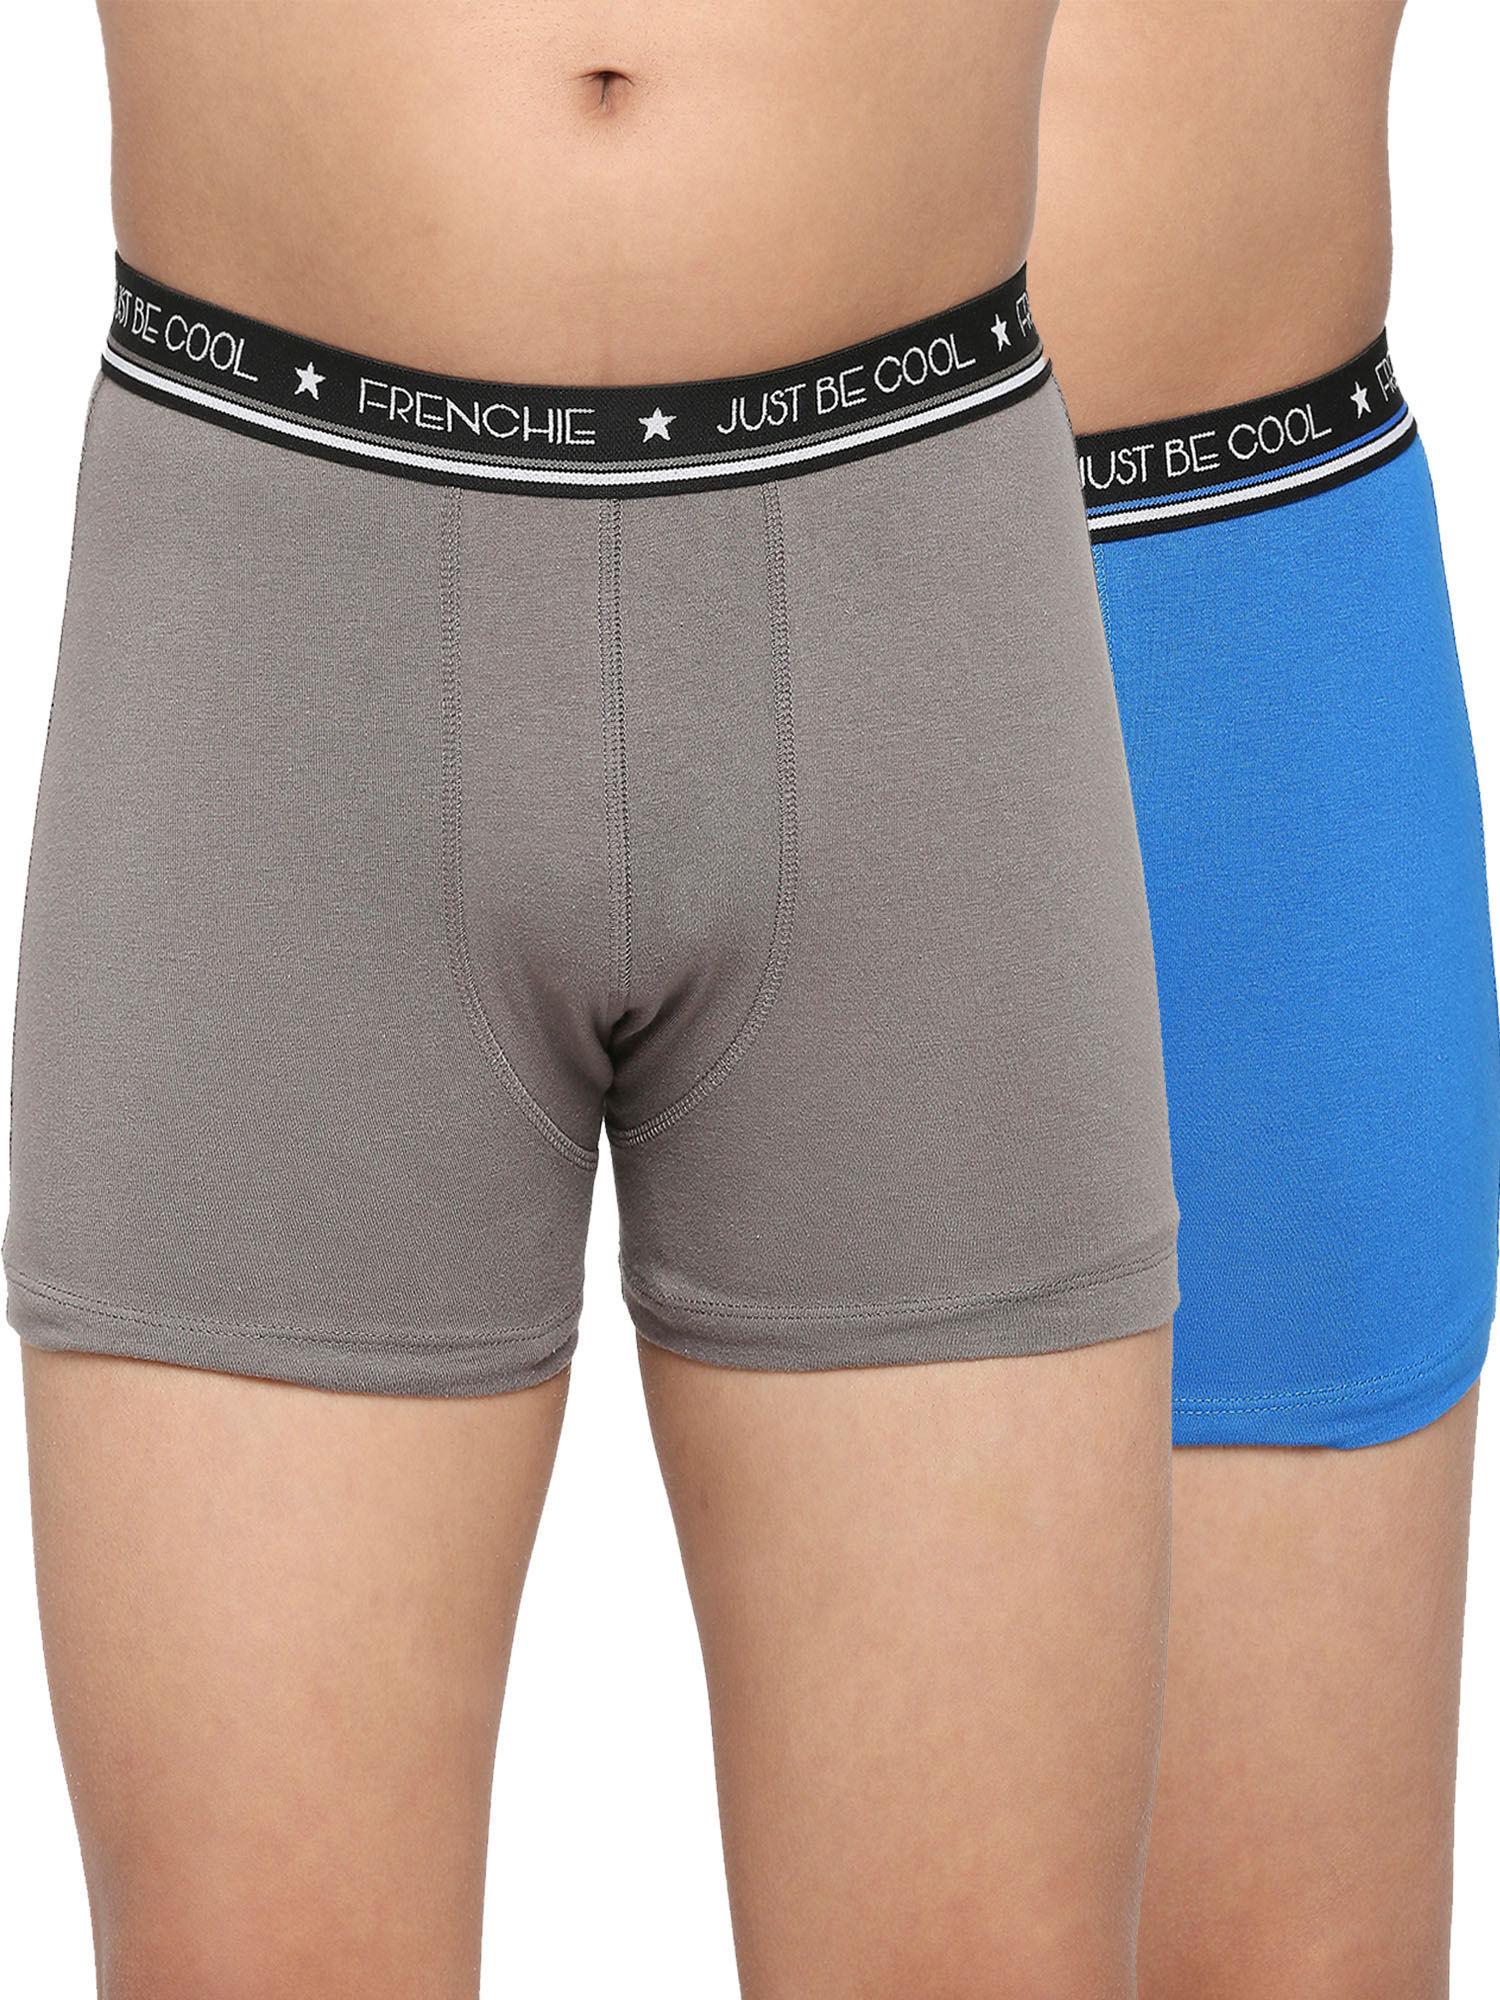 teenagers cotton trunk grey and blue (pack of 2)